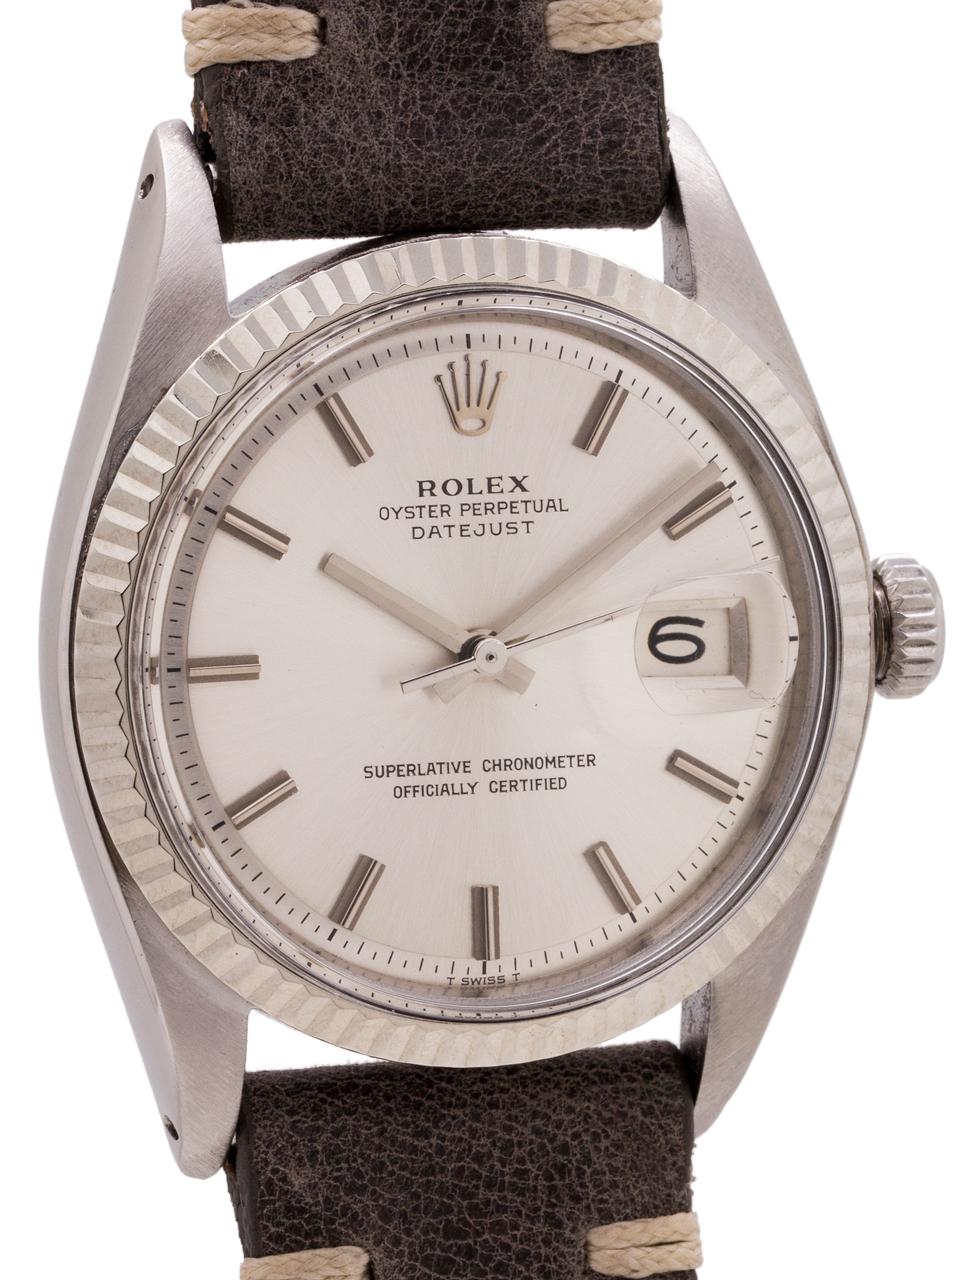 
Rolex Oyster Perpetual Datejust ref 1601 serial# 2.0 million circa 1969. Featuring a 36mm diameter case with 14K WG fluted bezel and acrylic crystal and original silver pie pan dial with applied silver indexes and silver baton hands. Powered by